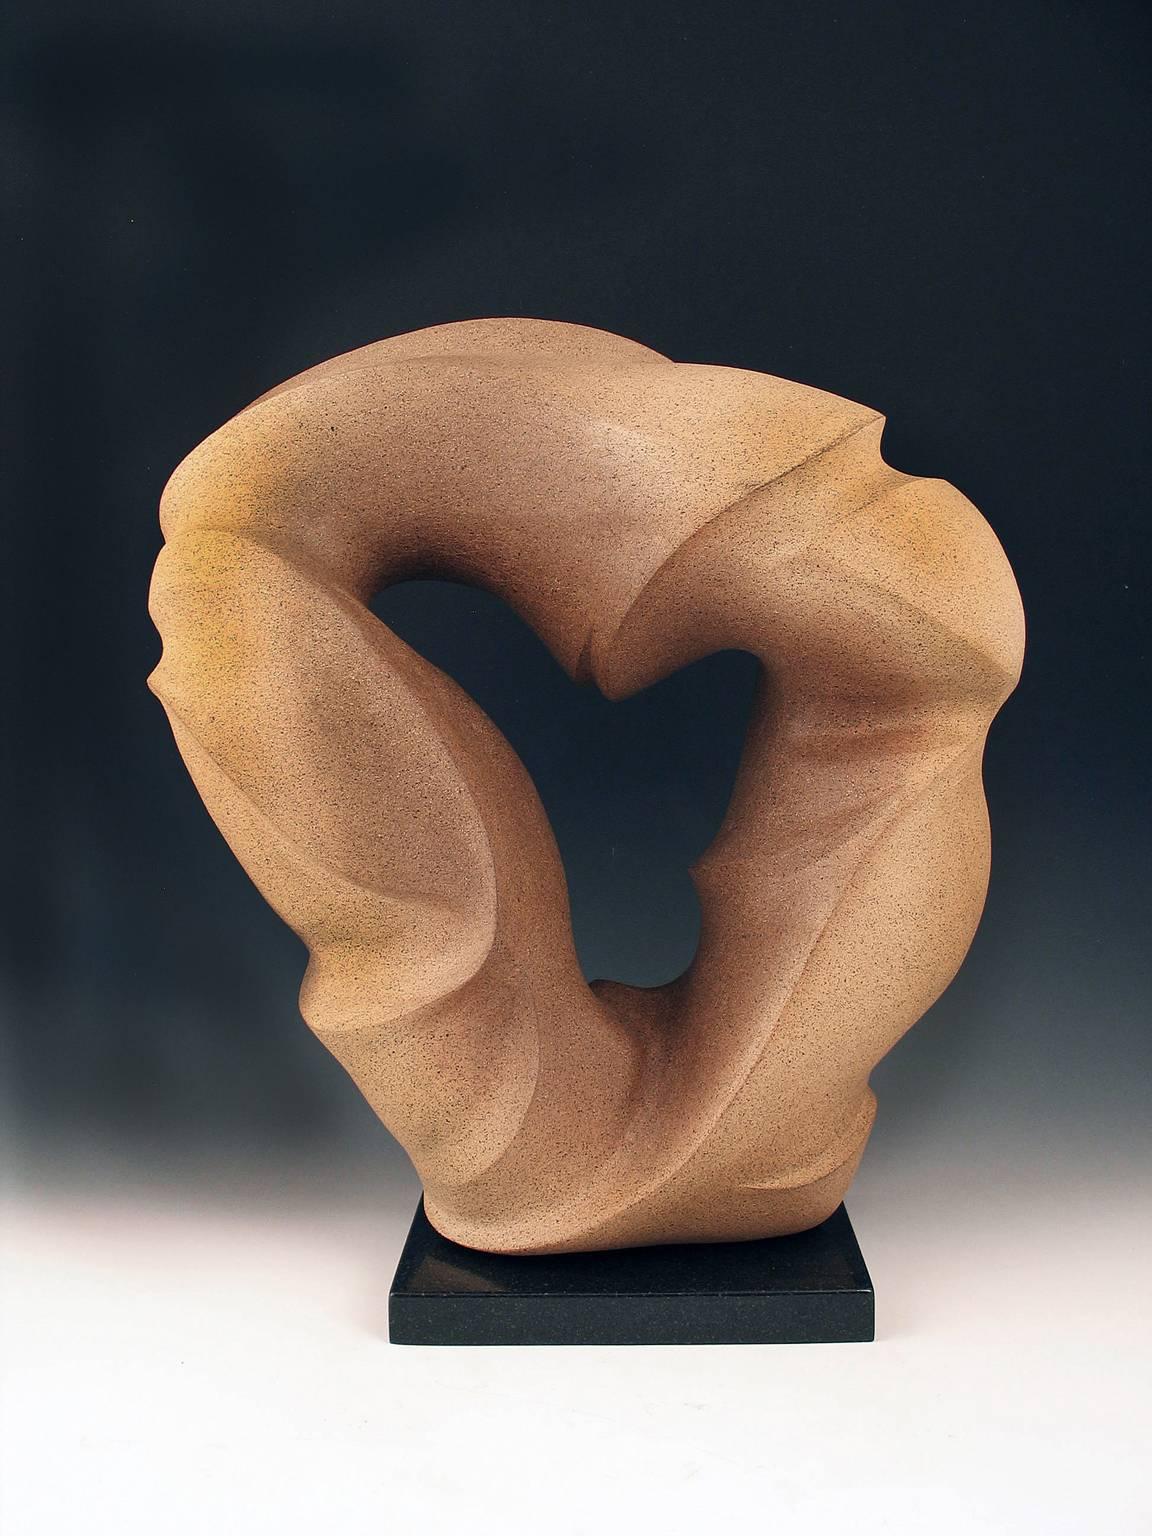 Elaine Lorenz Abstract Sculpture -  “Sandstone Passages”, speckled ceramic, inspired by sandstone and water